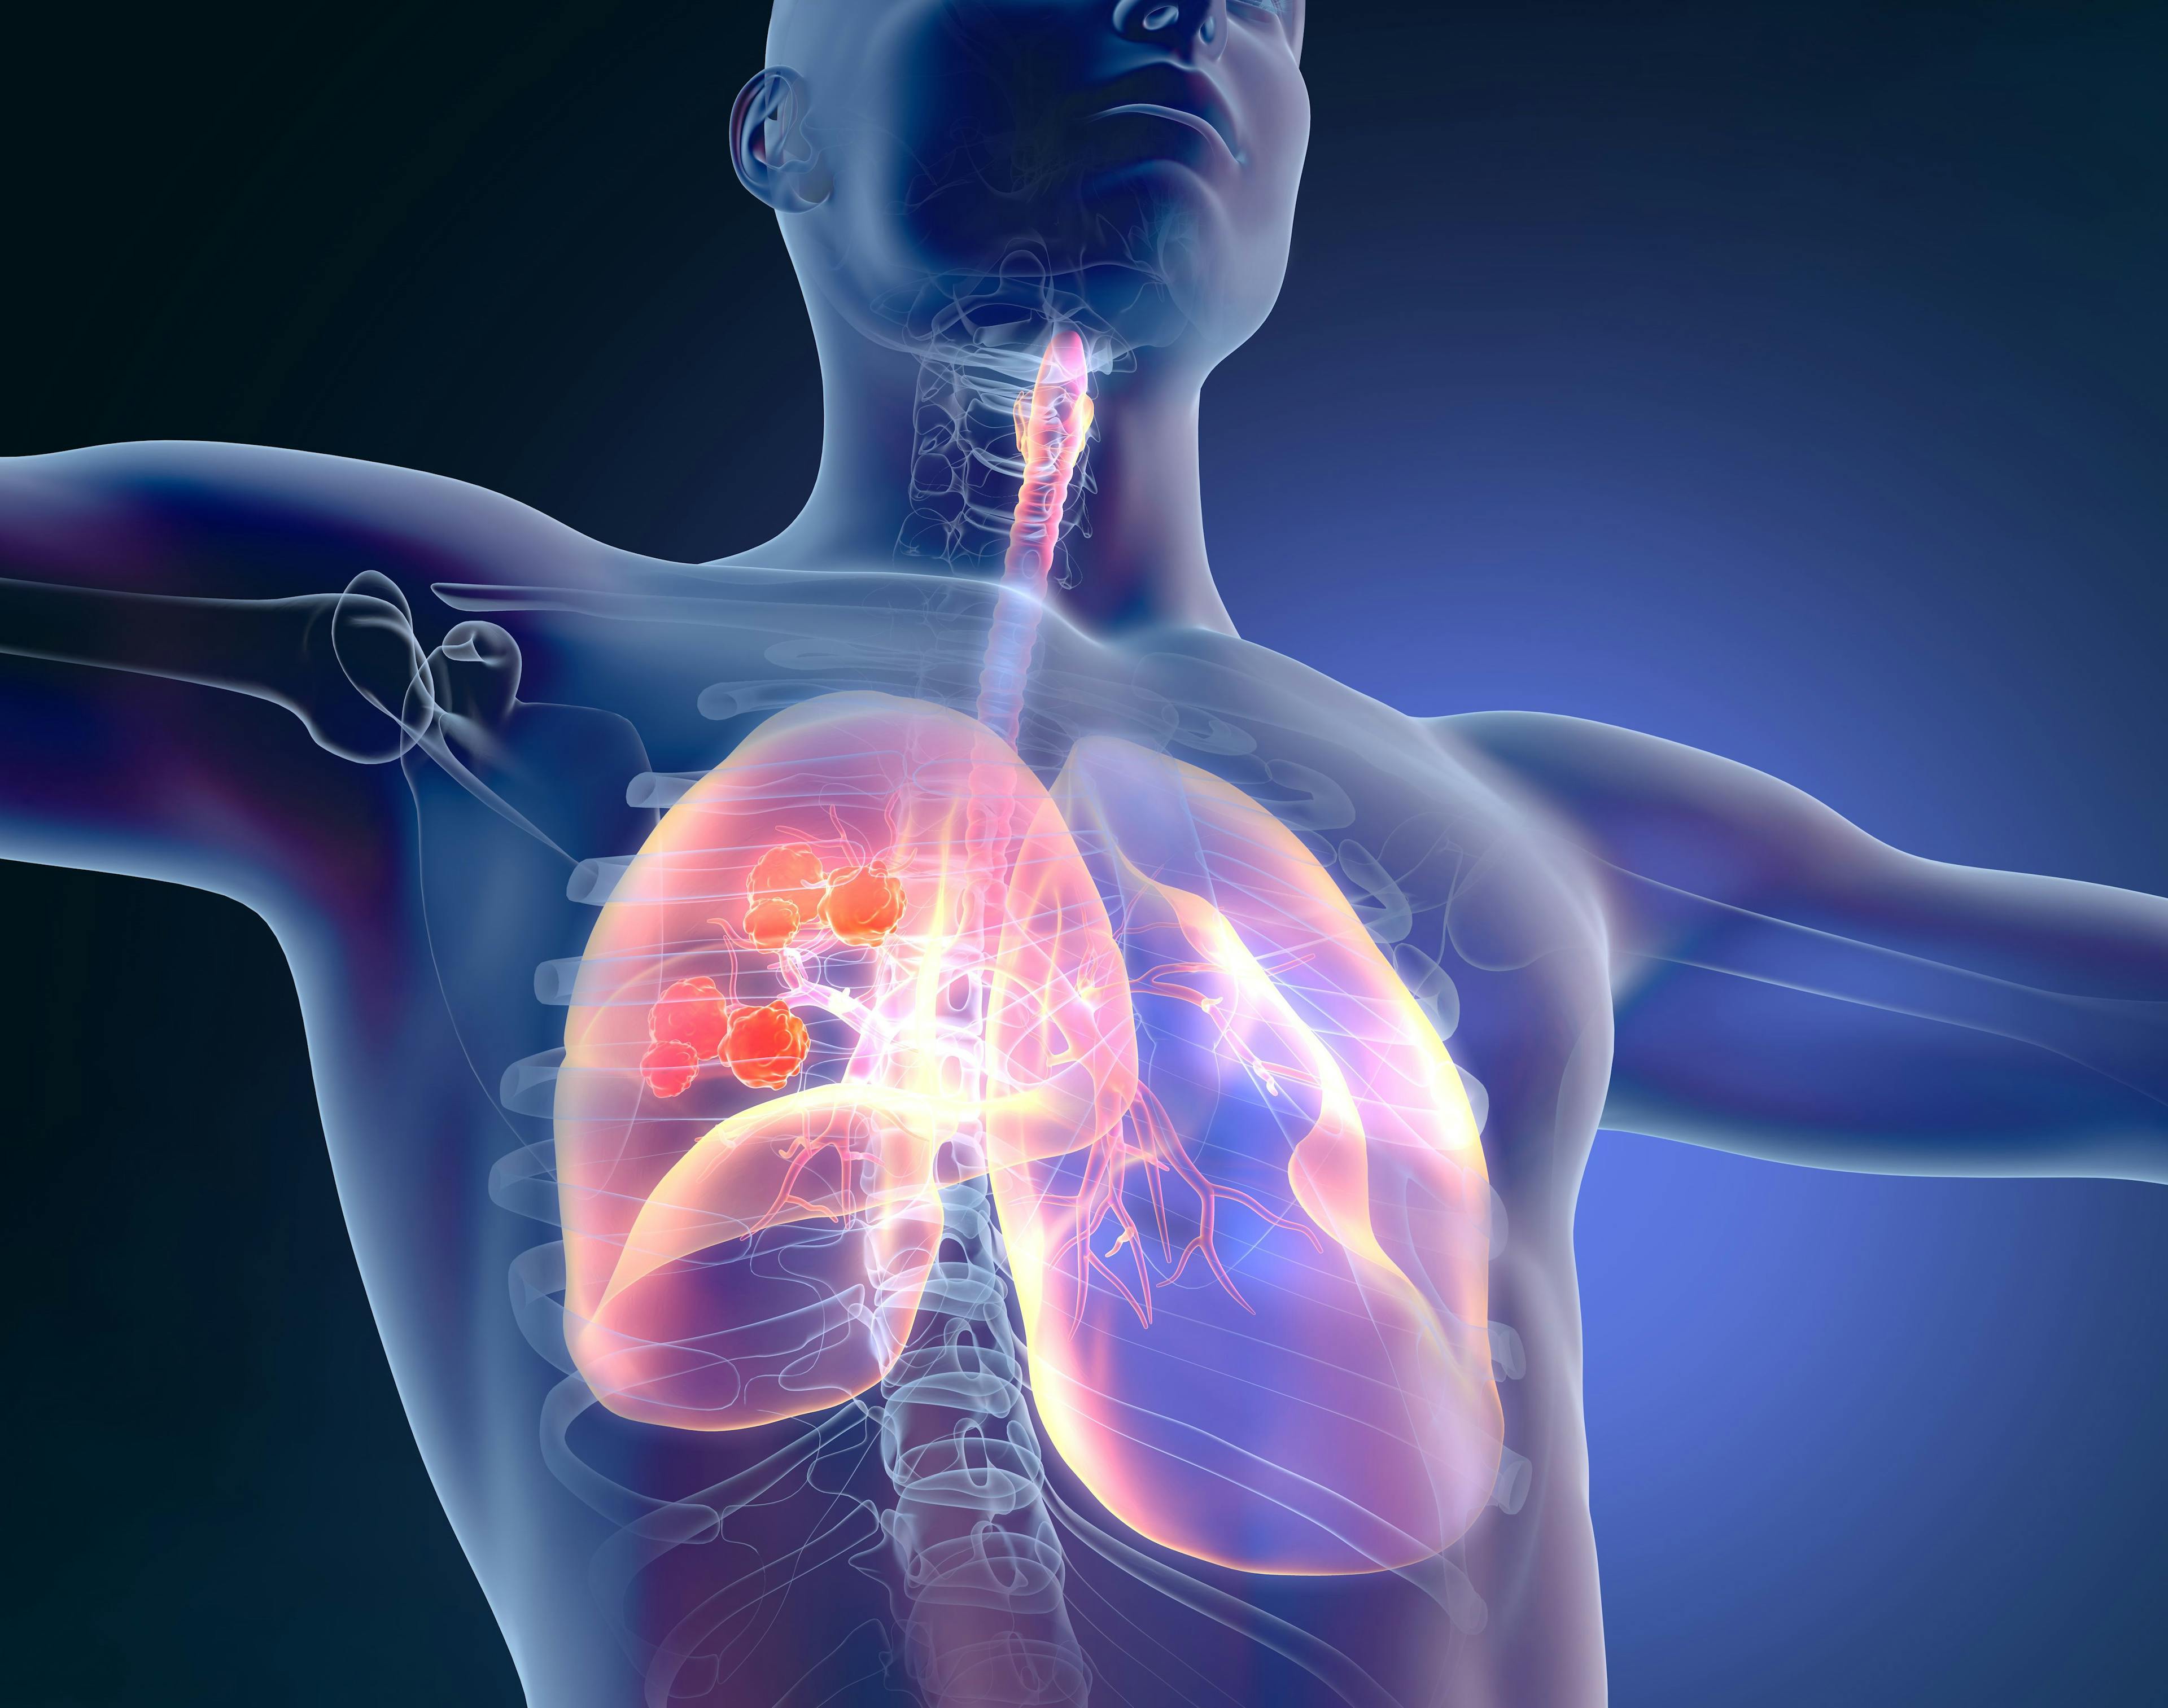 Findings from the phase 2 NRG-LU001 trial indicated that the addition of metformin to radiotherapy did not improve survival outcomes in patients with non–small cell lung cancer.